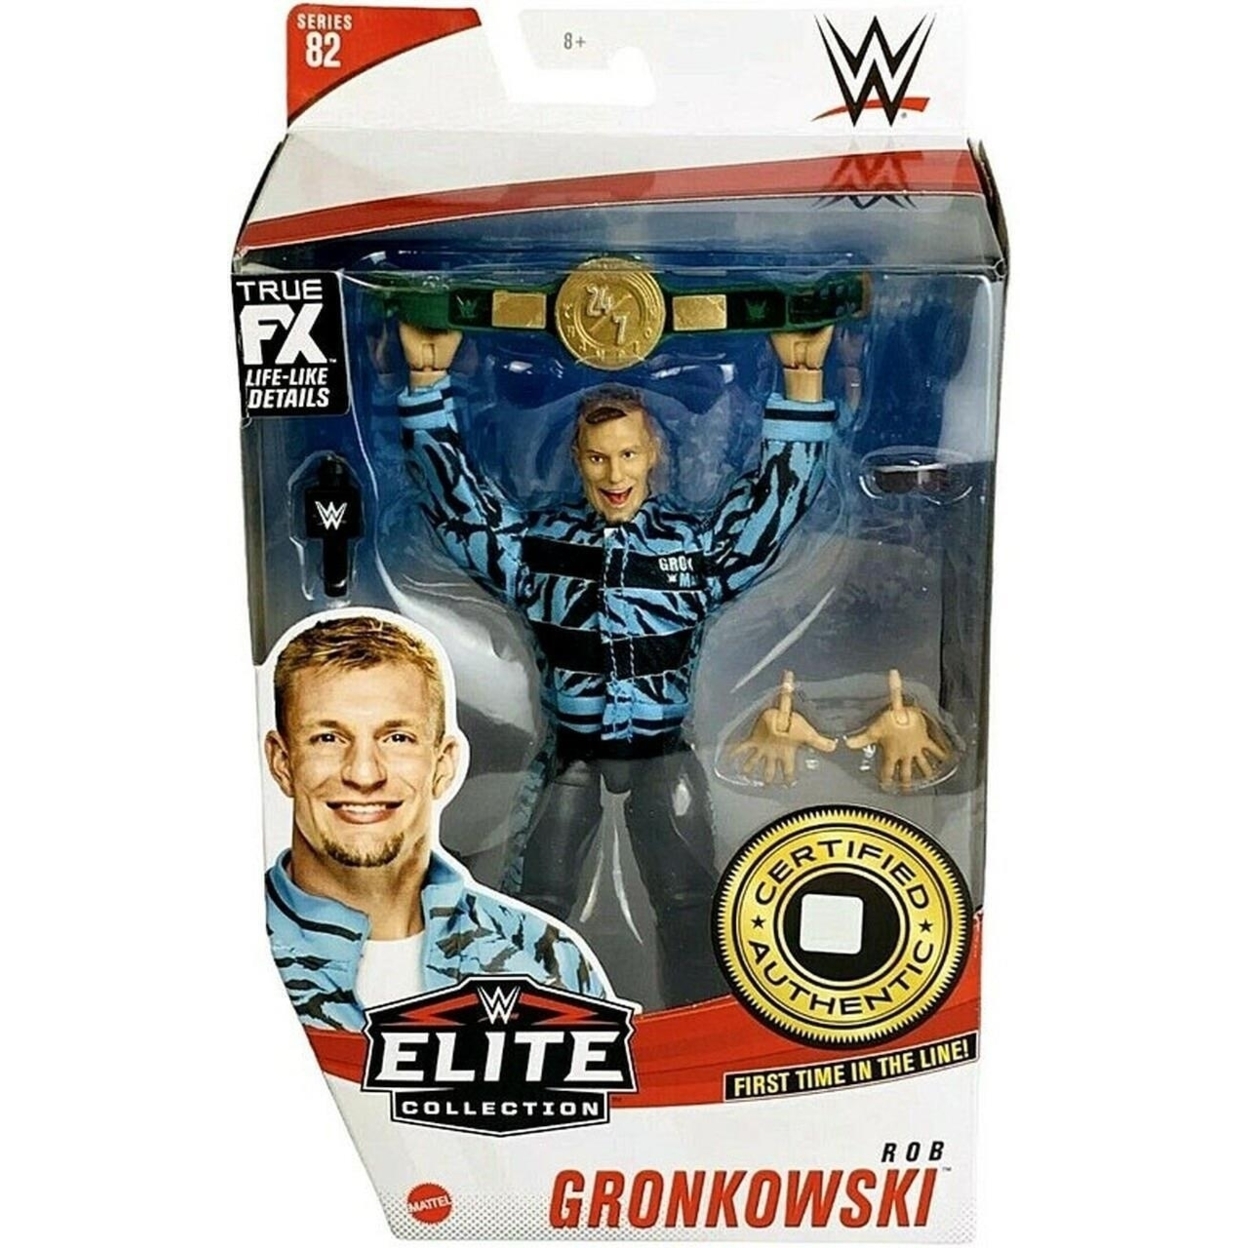 WWE Rob Gronkowski Elite Collection Action Figure with Accessories - image 2 of 7